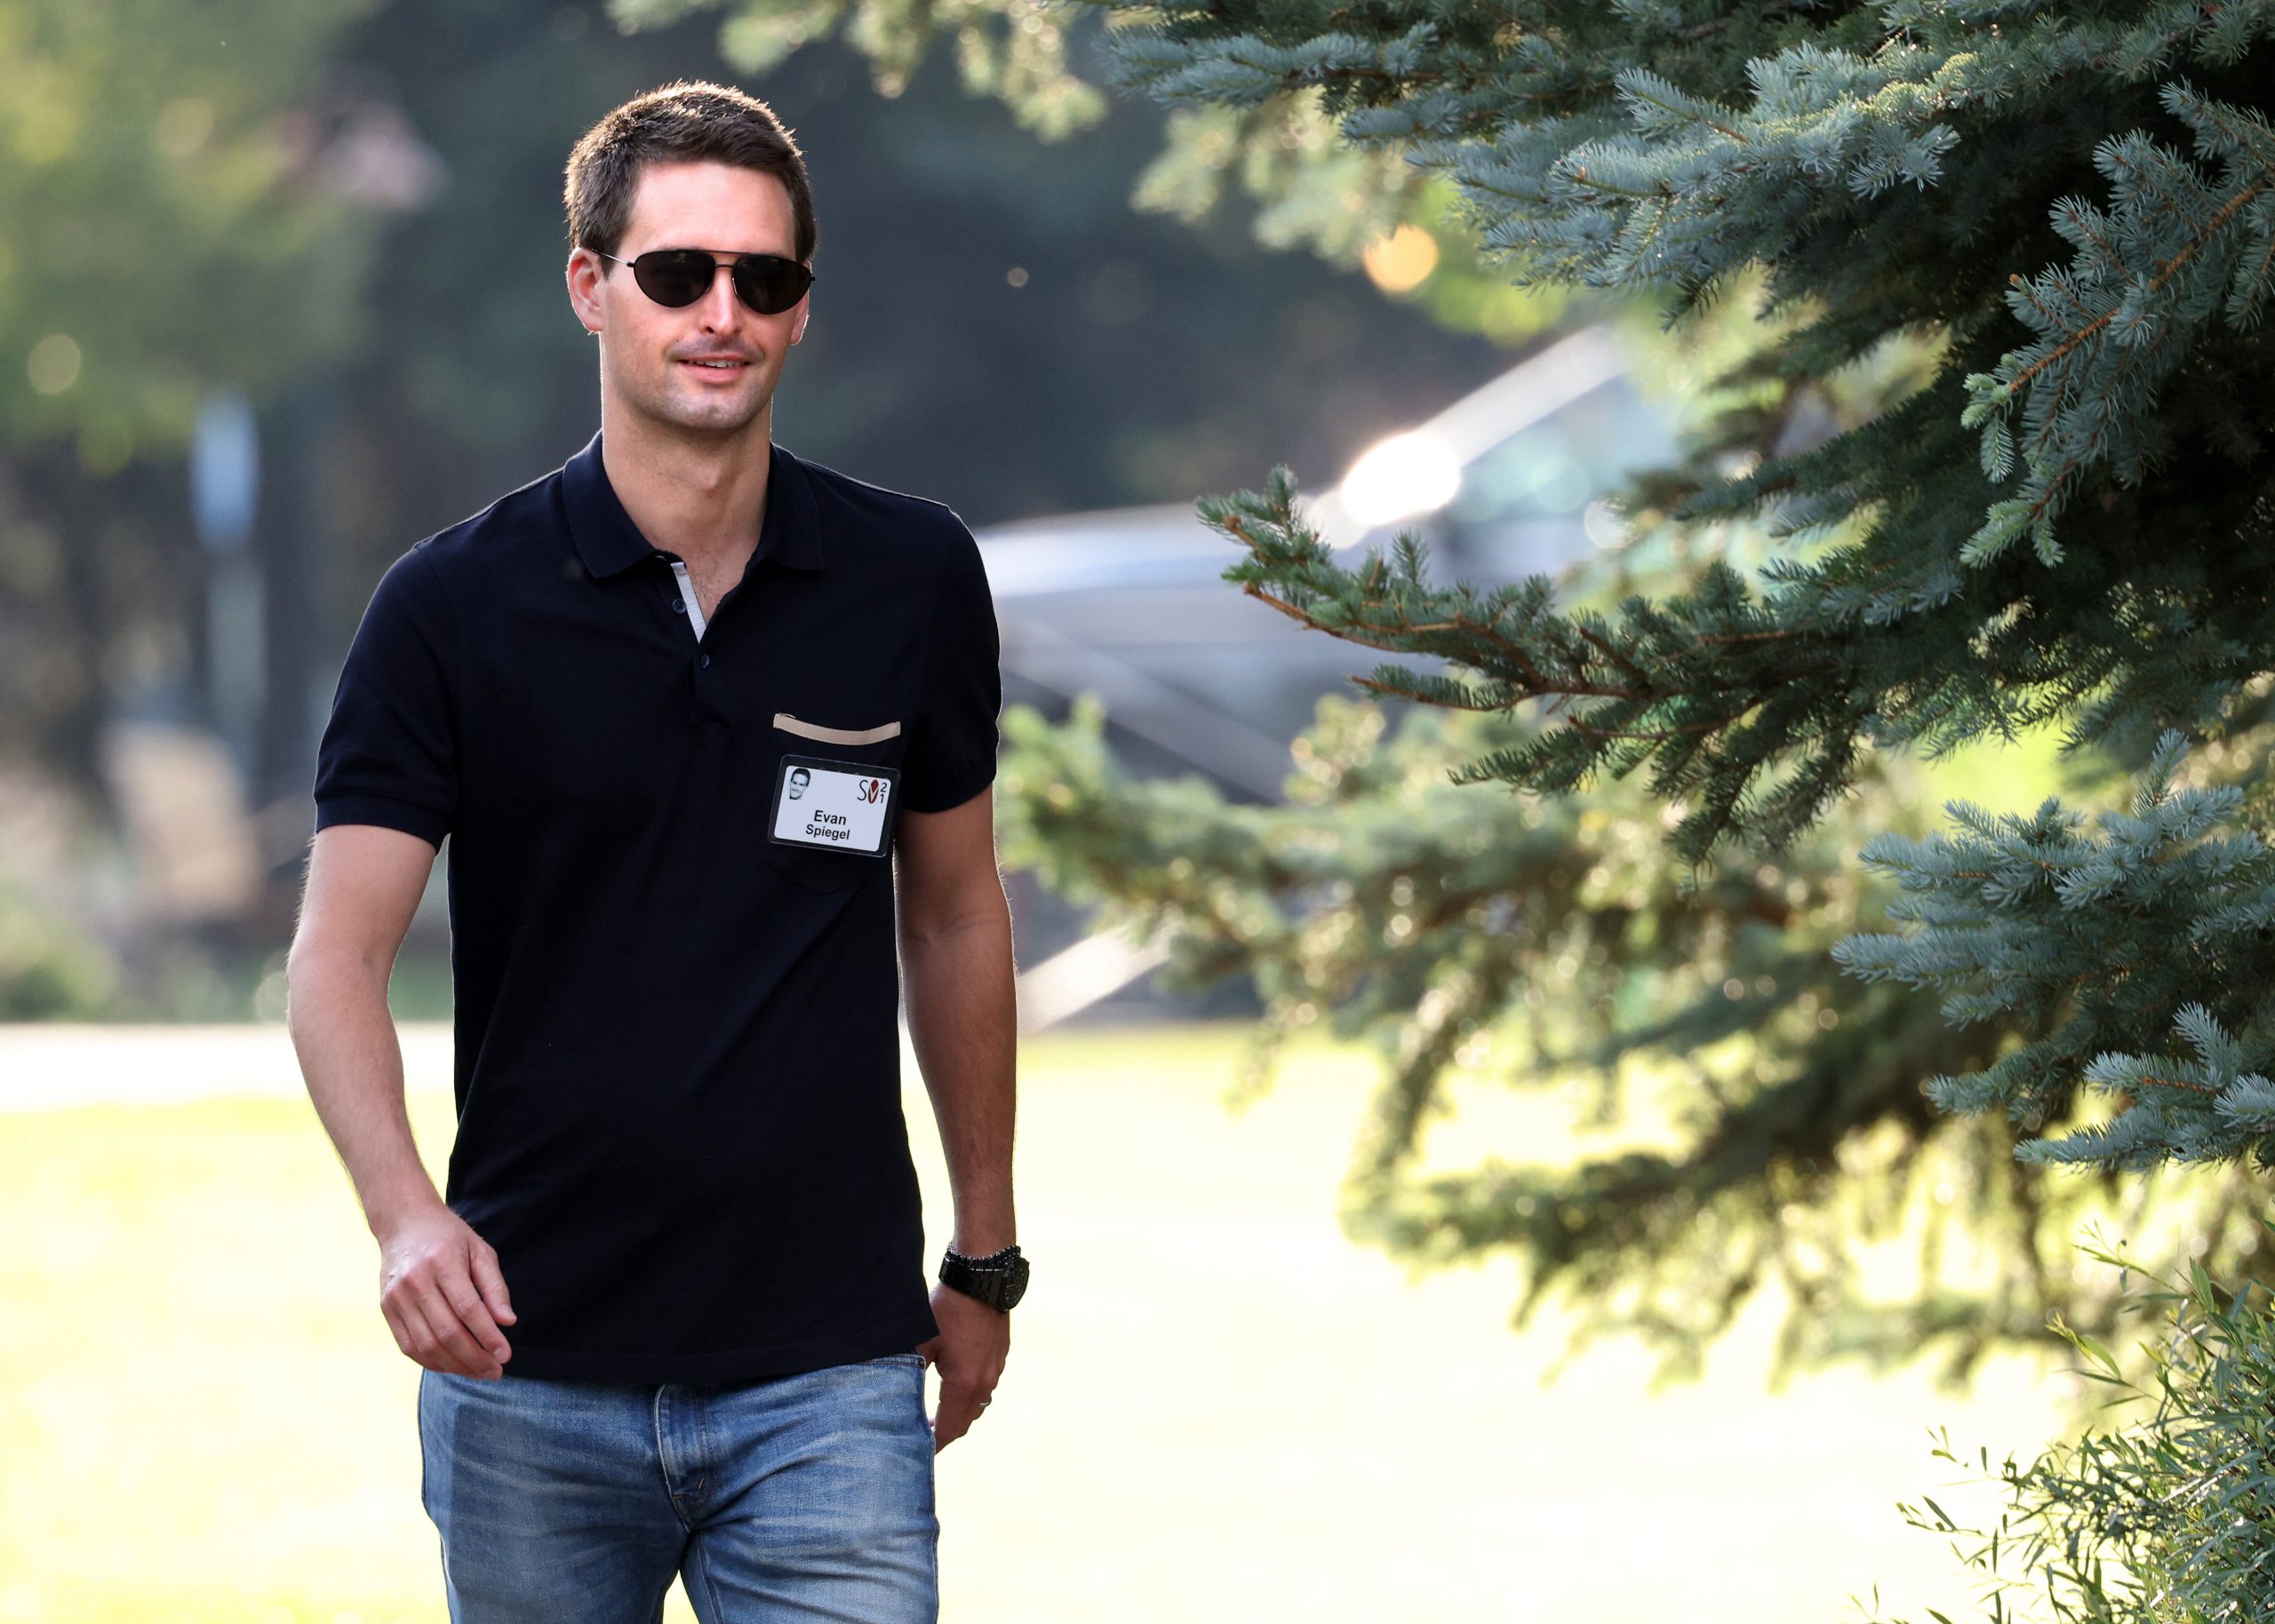 Snap pops more than 16% on earnings beat and user growth